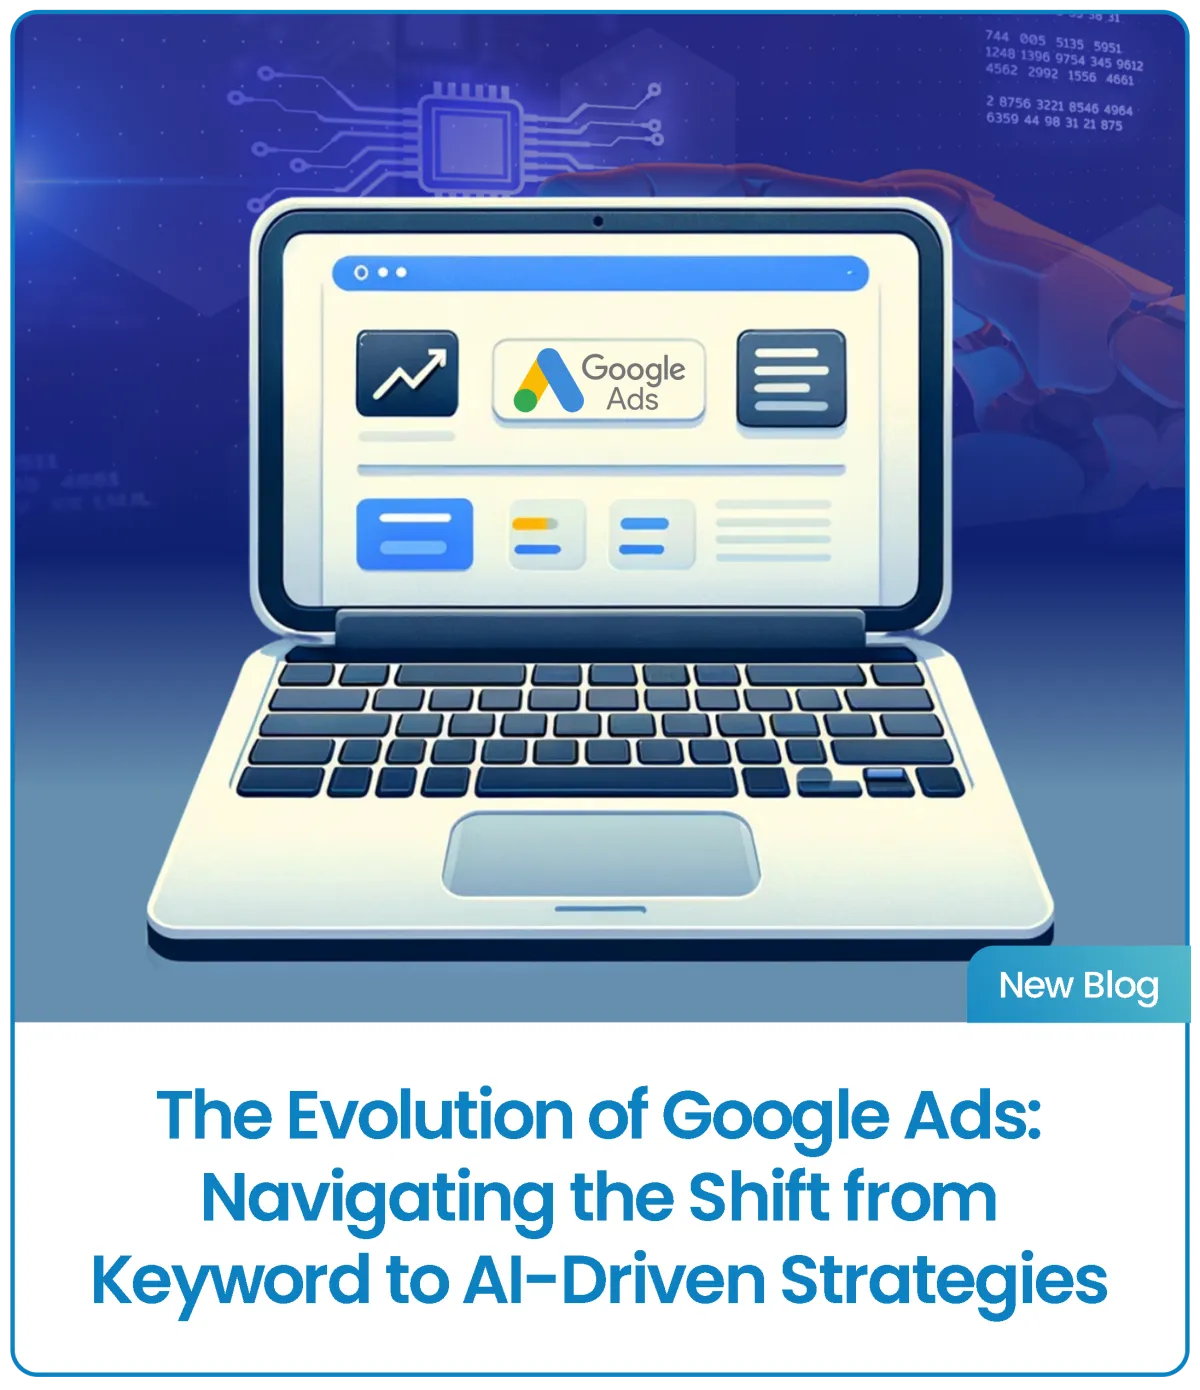 The Evolution of Google Ads: Navigating the Shift from Keyword to AI-Driven Strategies